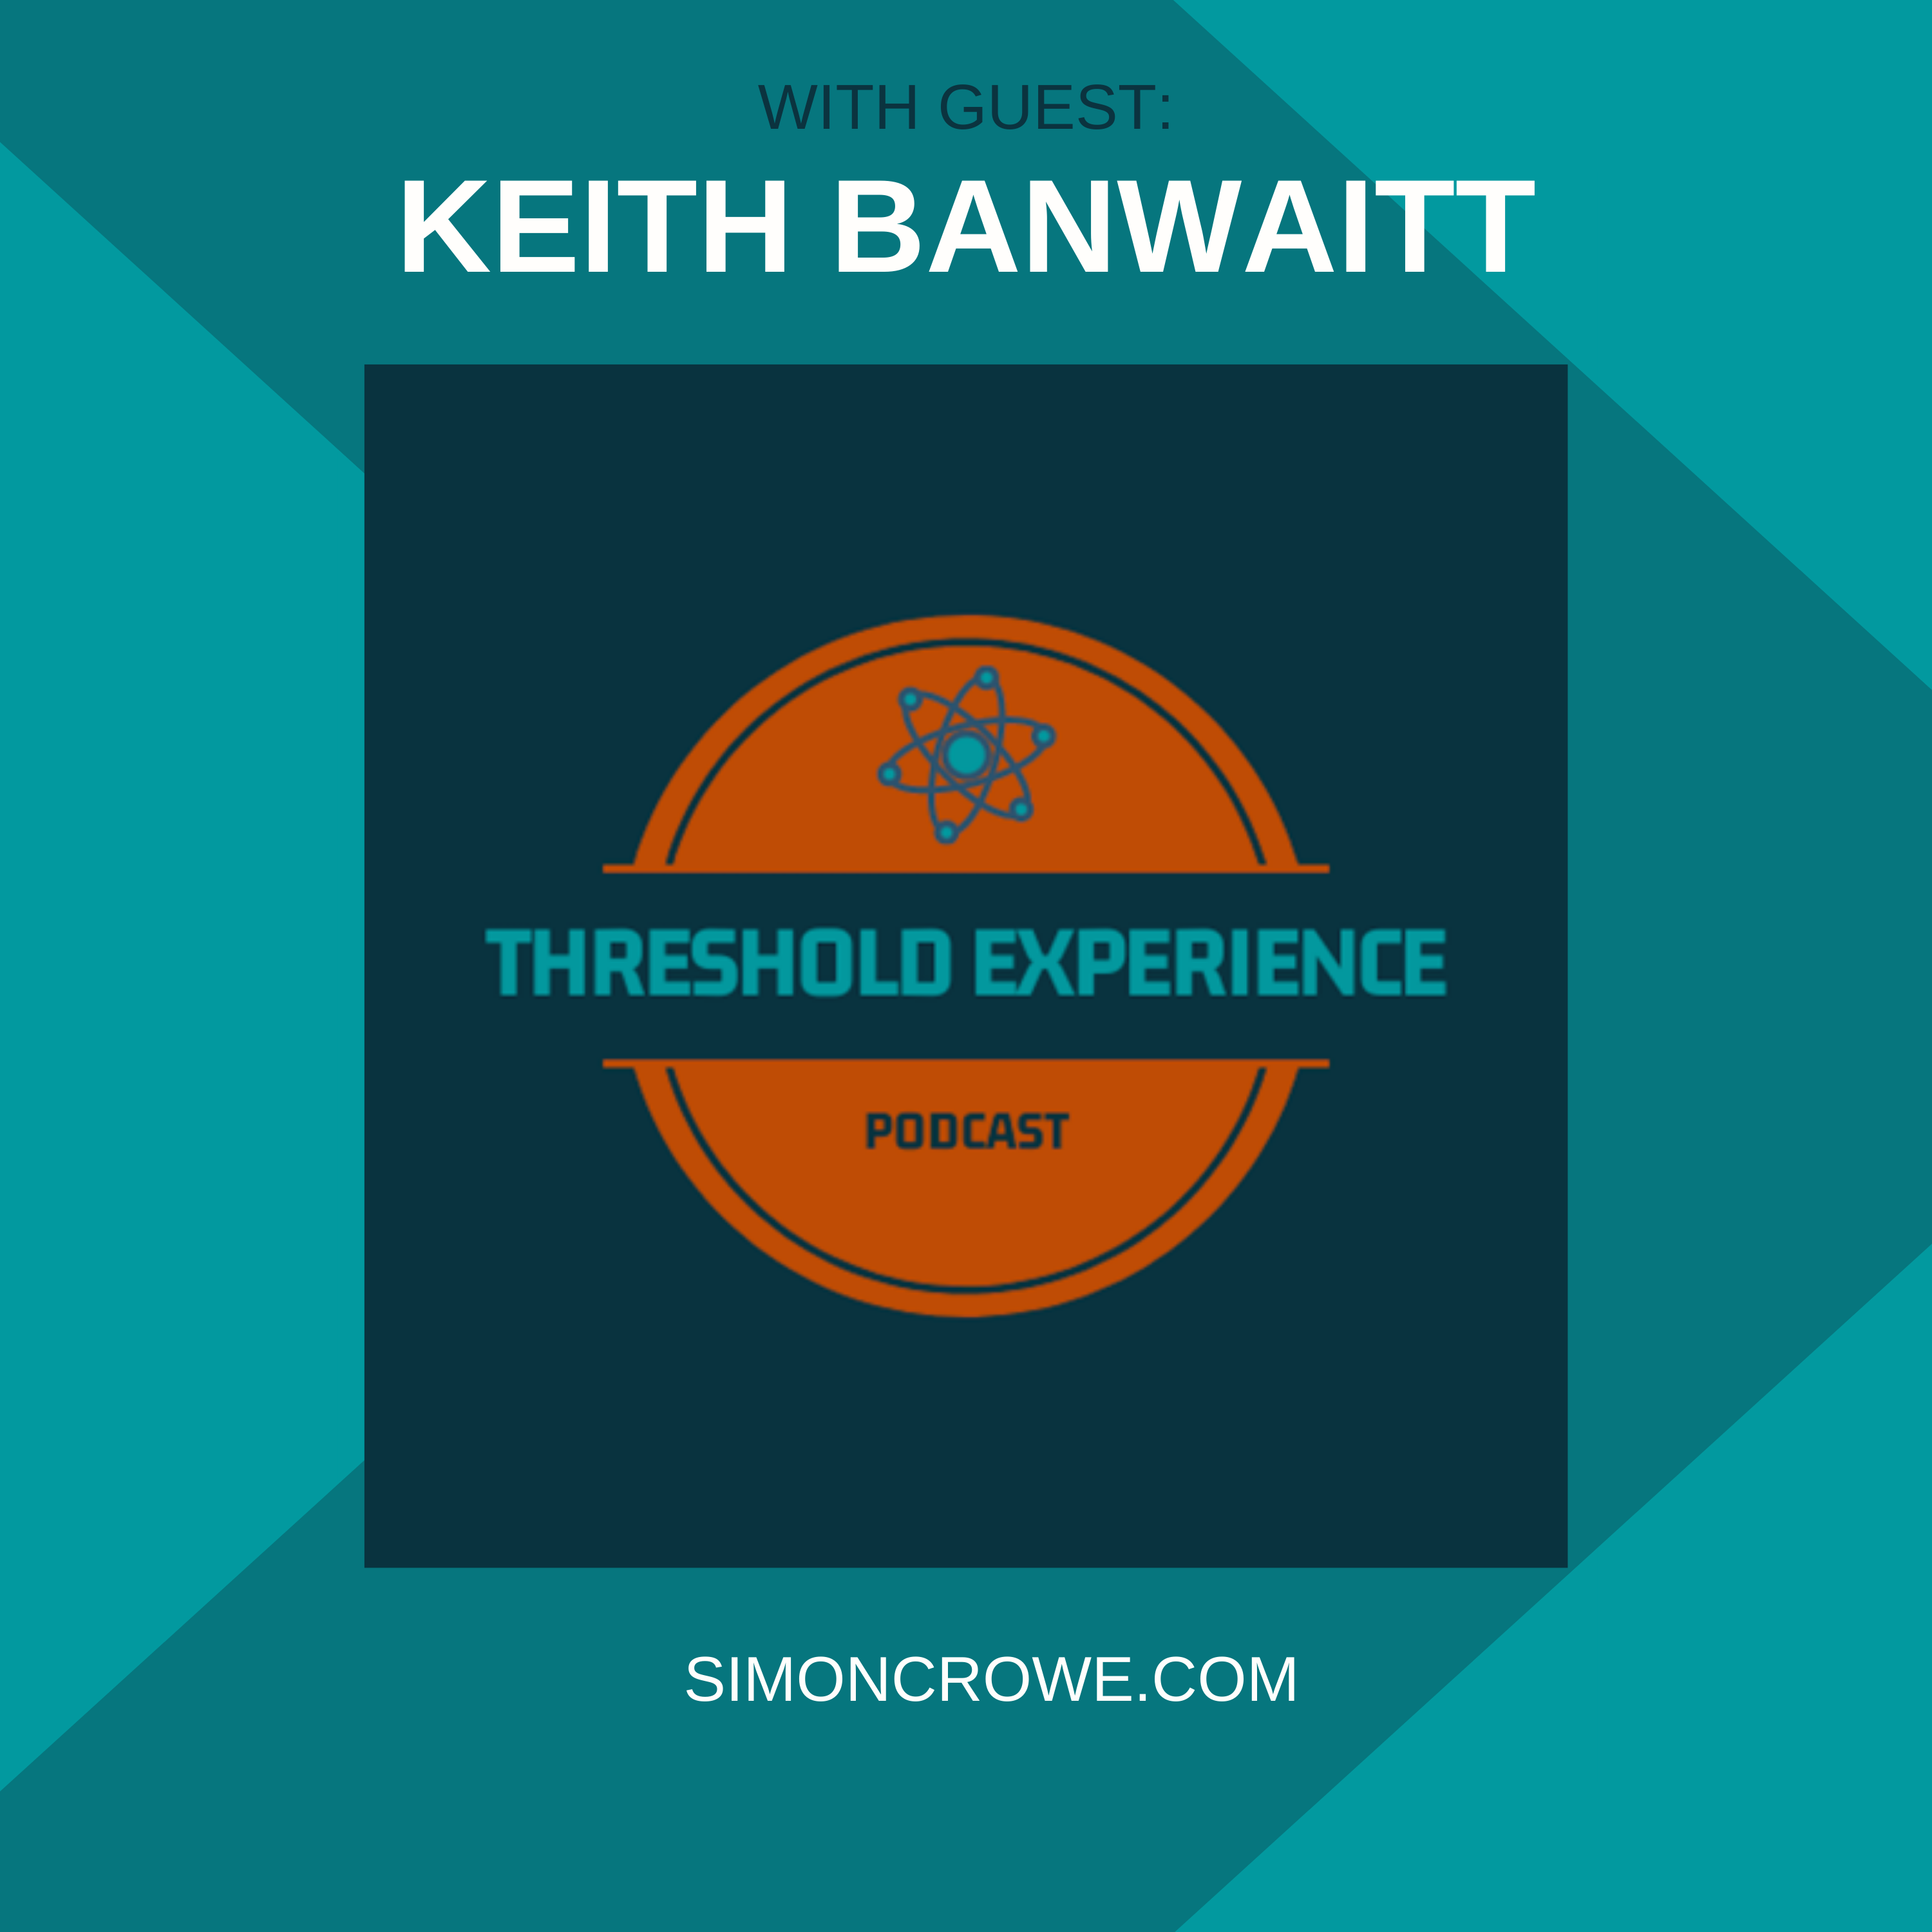 Podcast cover image showing the names of the people in discussion about threshold experiences, Simon Crowe & Keith Banwaitt